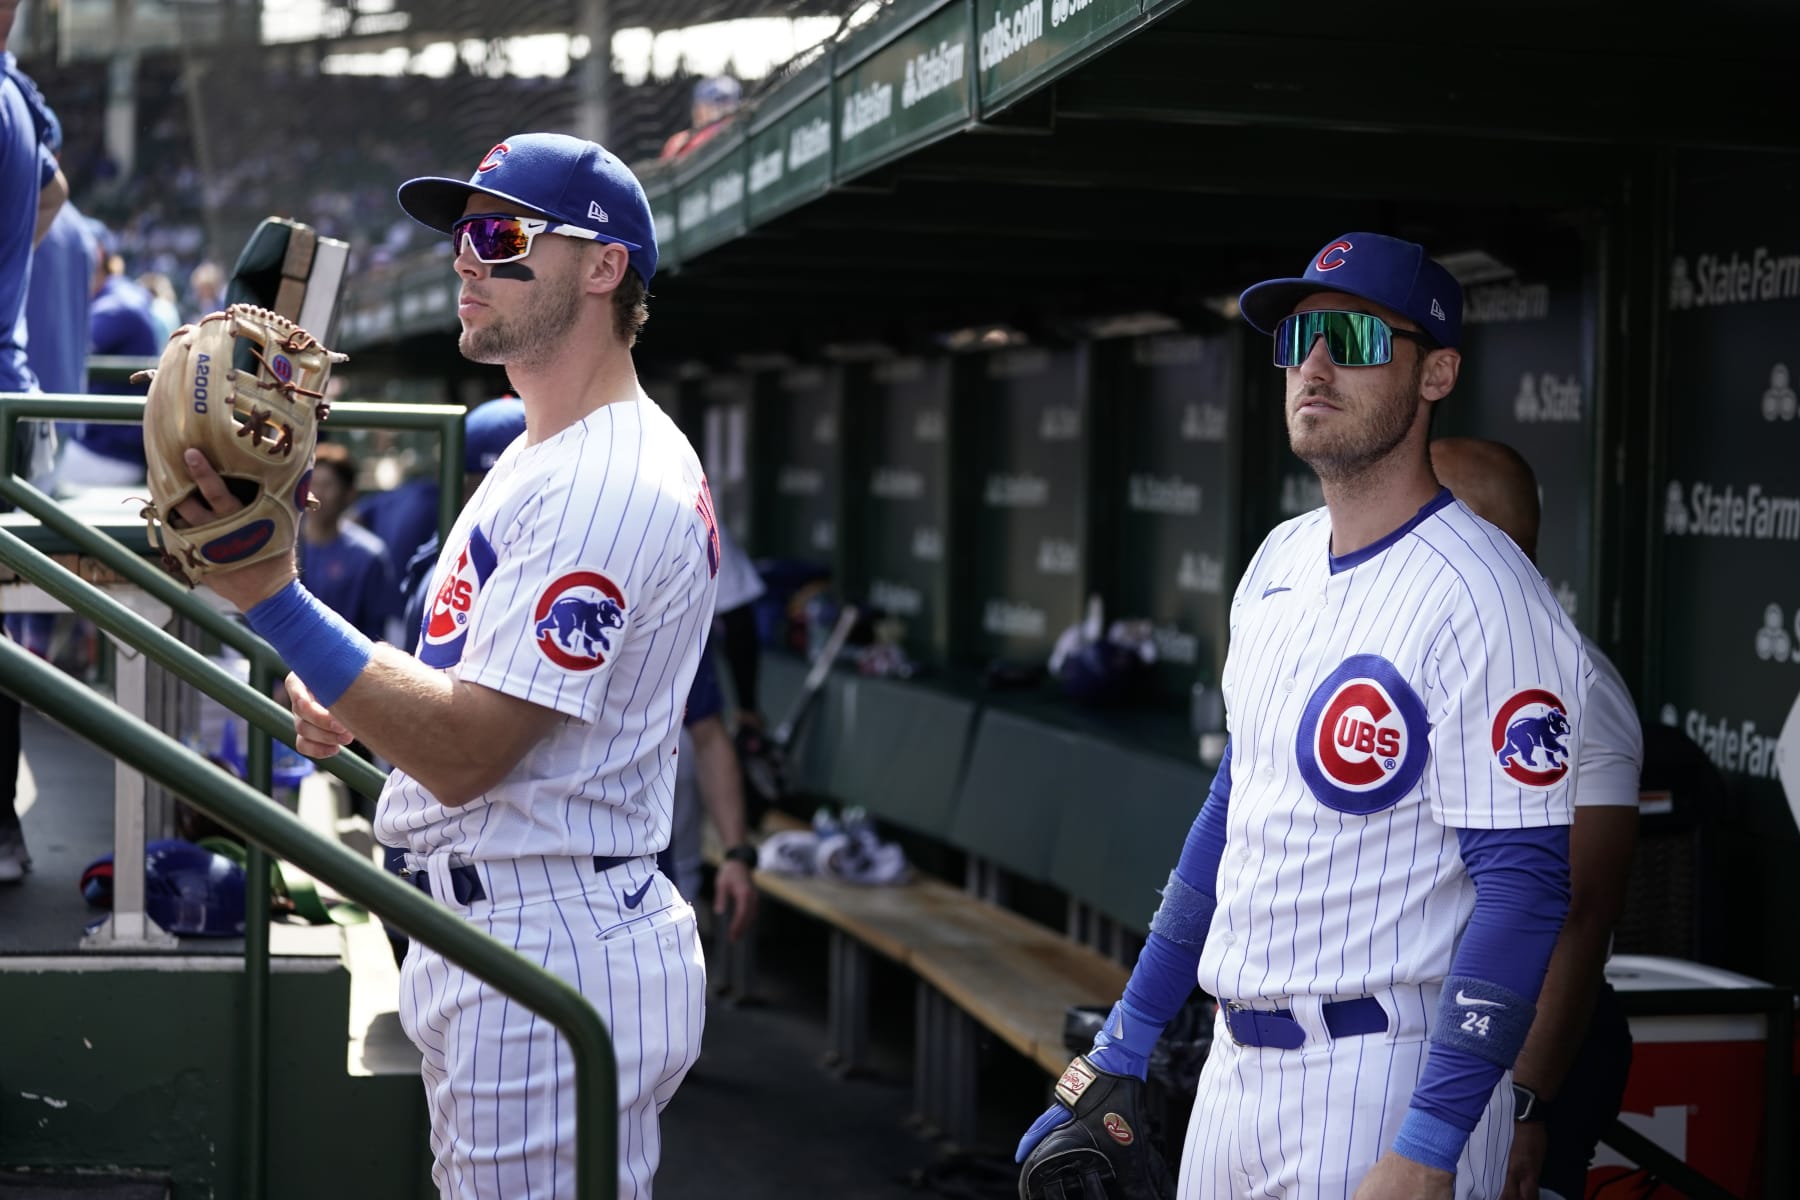 2023 Chicago Cubs Predictions and Odds to Win the World Series